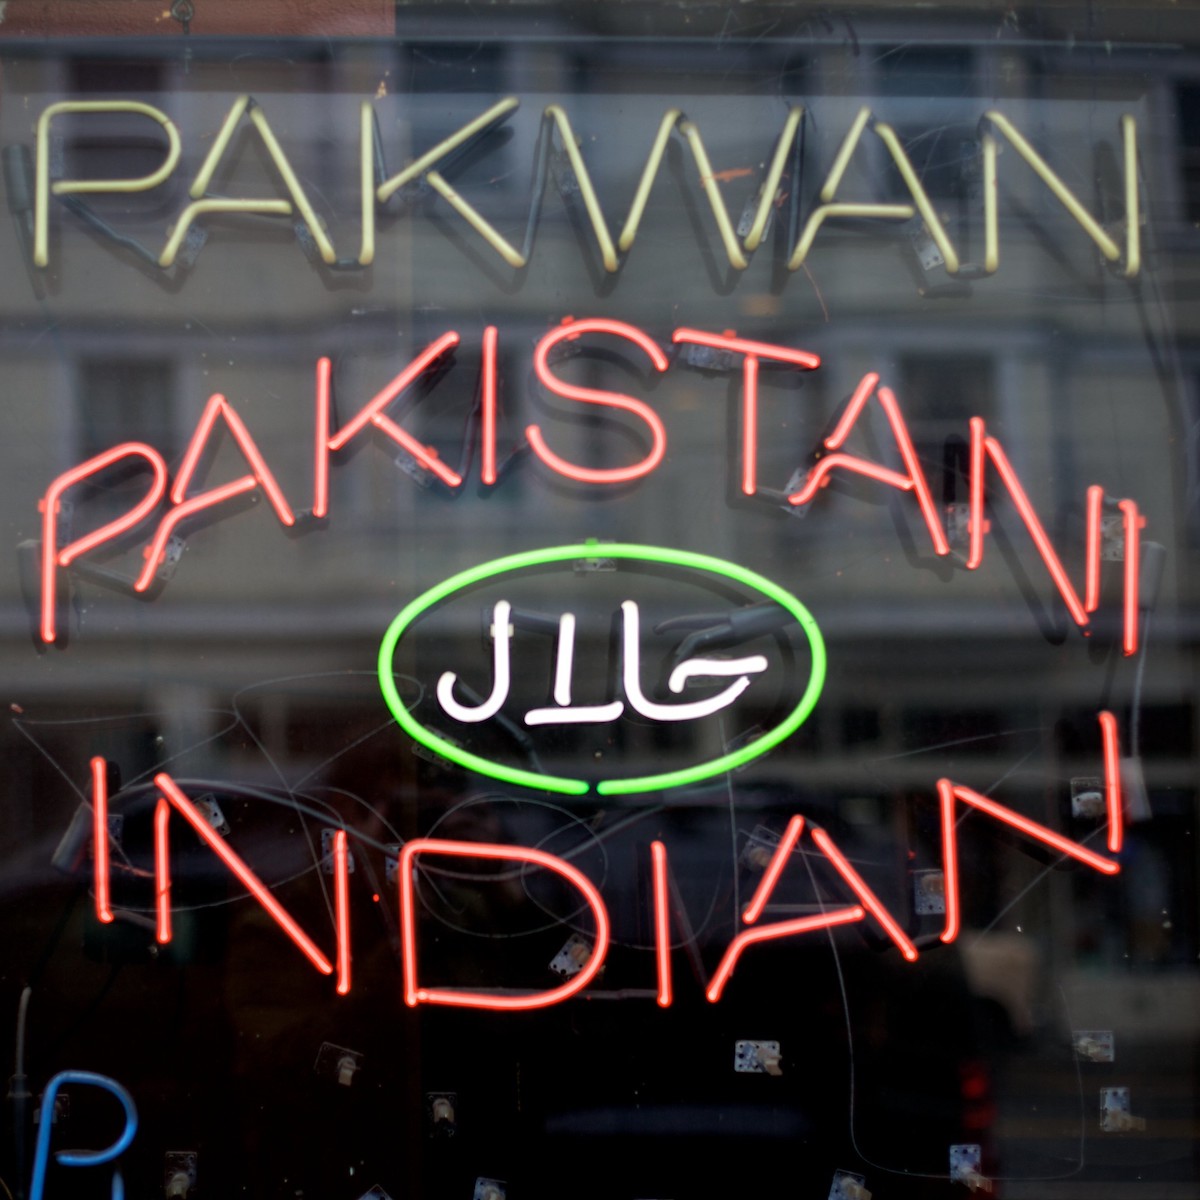 close up of a neon sign in a restaurant window. Yellow letters read "Pakwan" and read letters underneath read "Pakistani Indian"